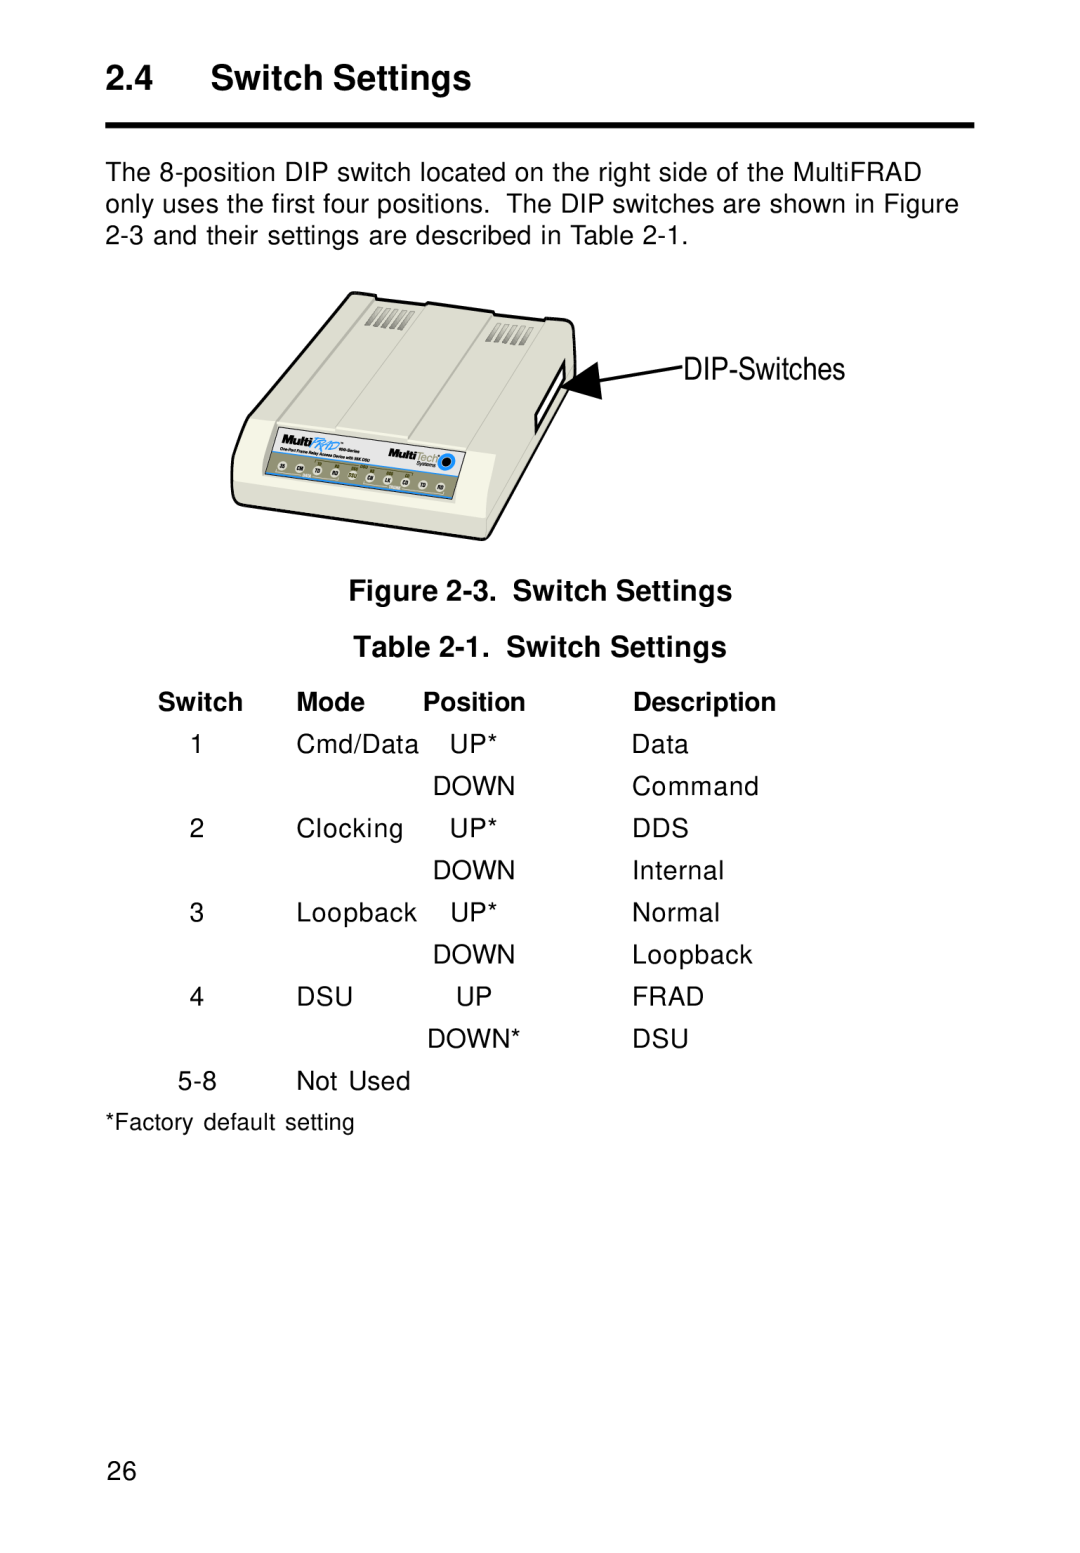 Multi-Tech Systems FR111 owner manual 3. Switch Settings, 1. Switch Settings, Mode, Position, Description, DIP-Switches 